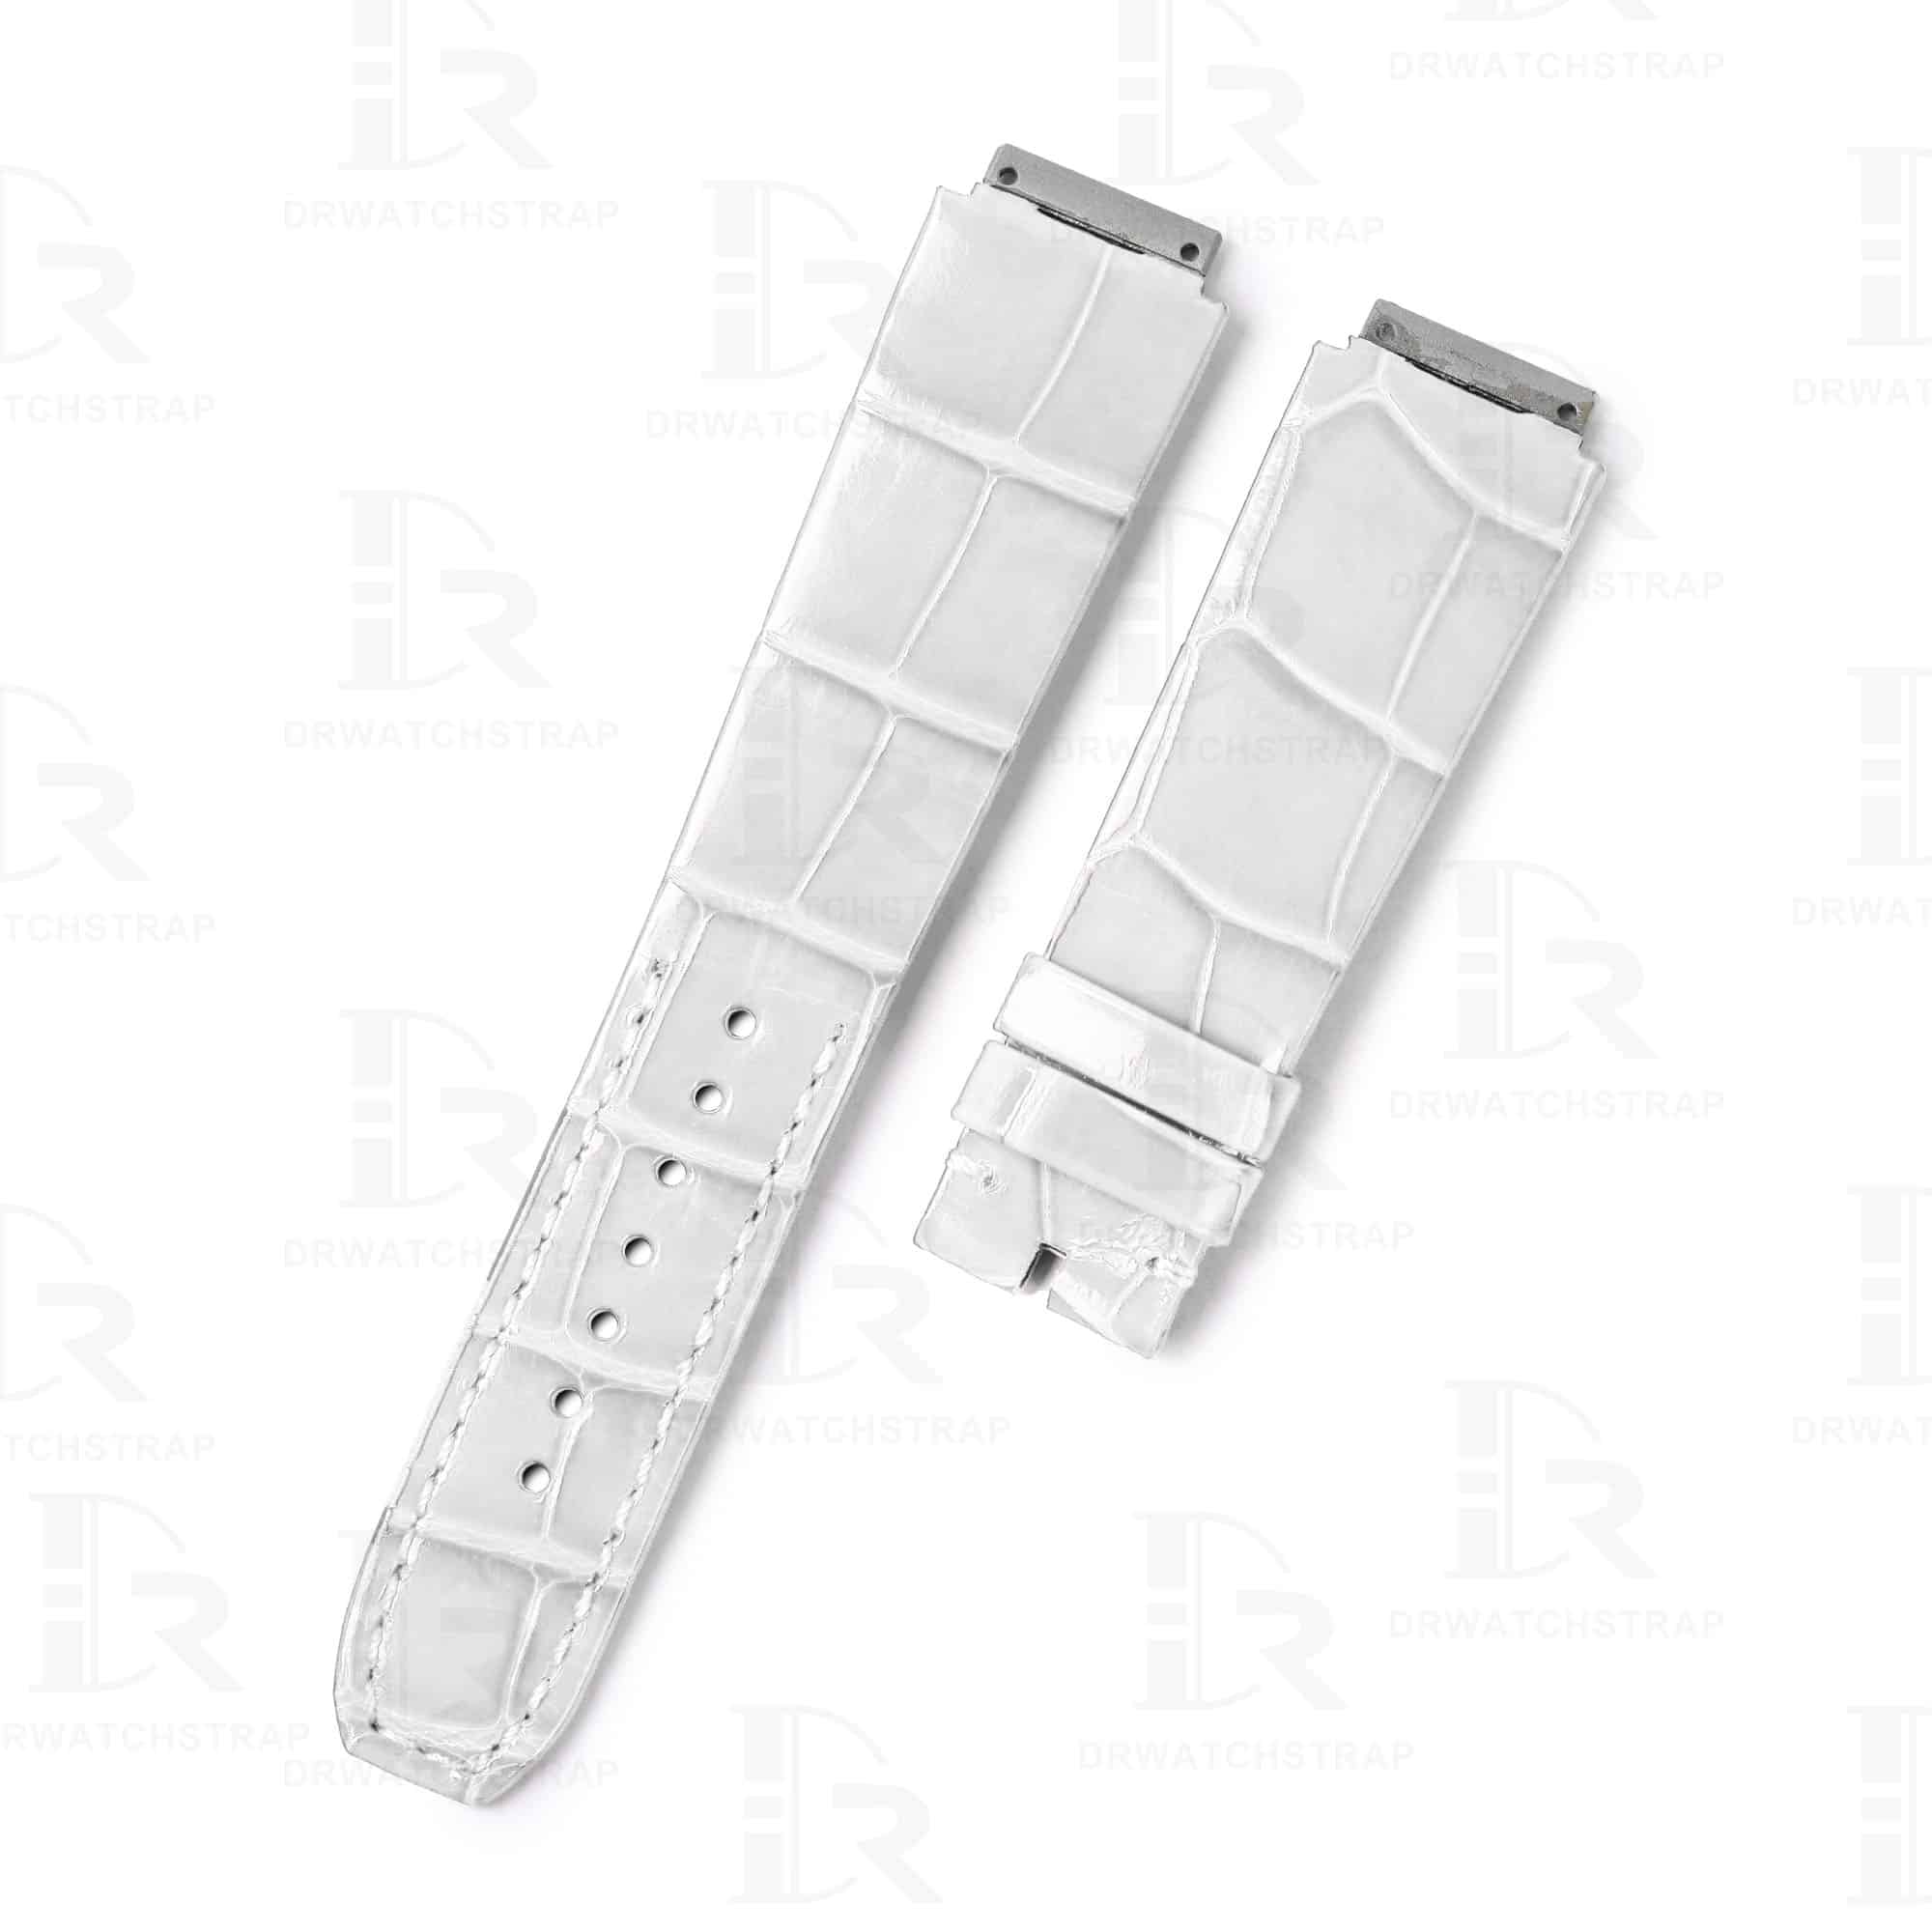 Replacement crocodile alligator belly-scale white leather straps for Richard Mille watchbands